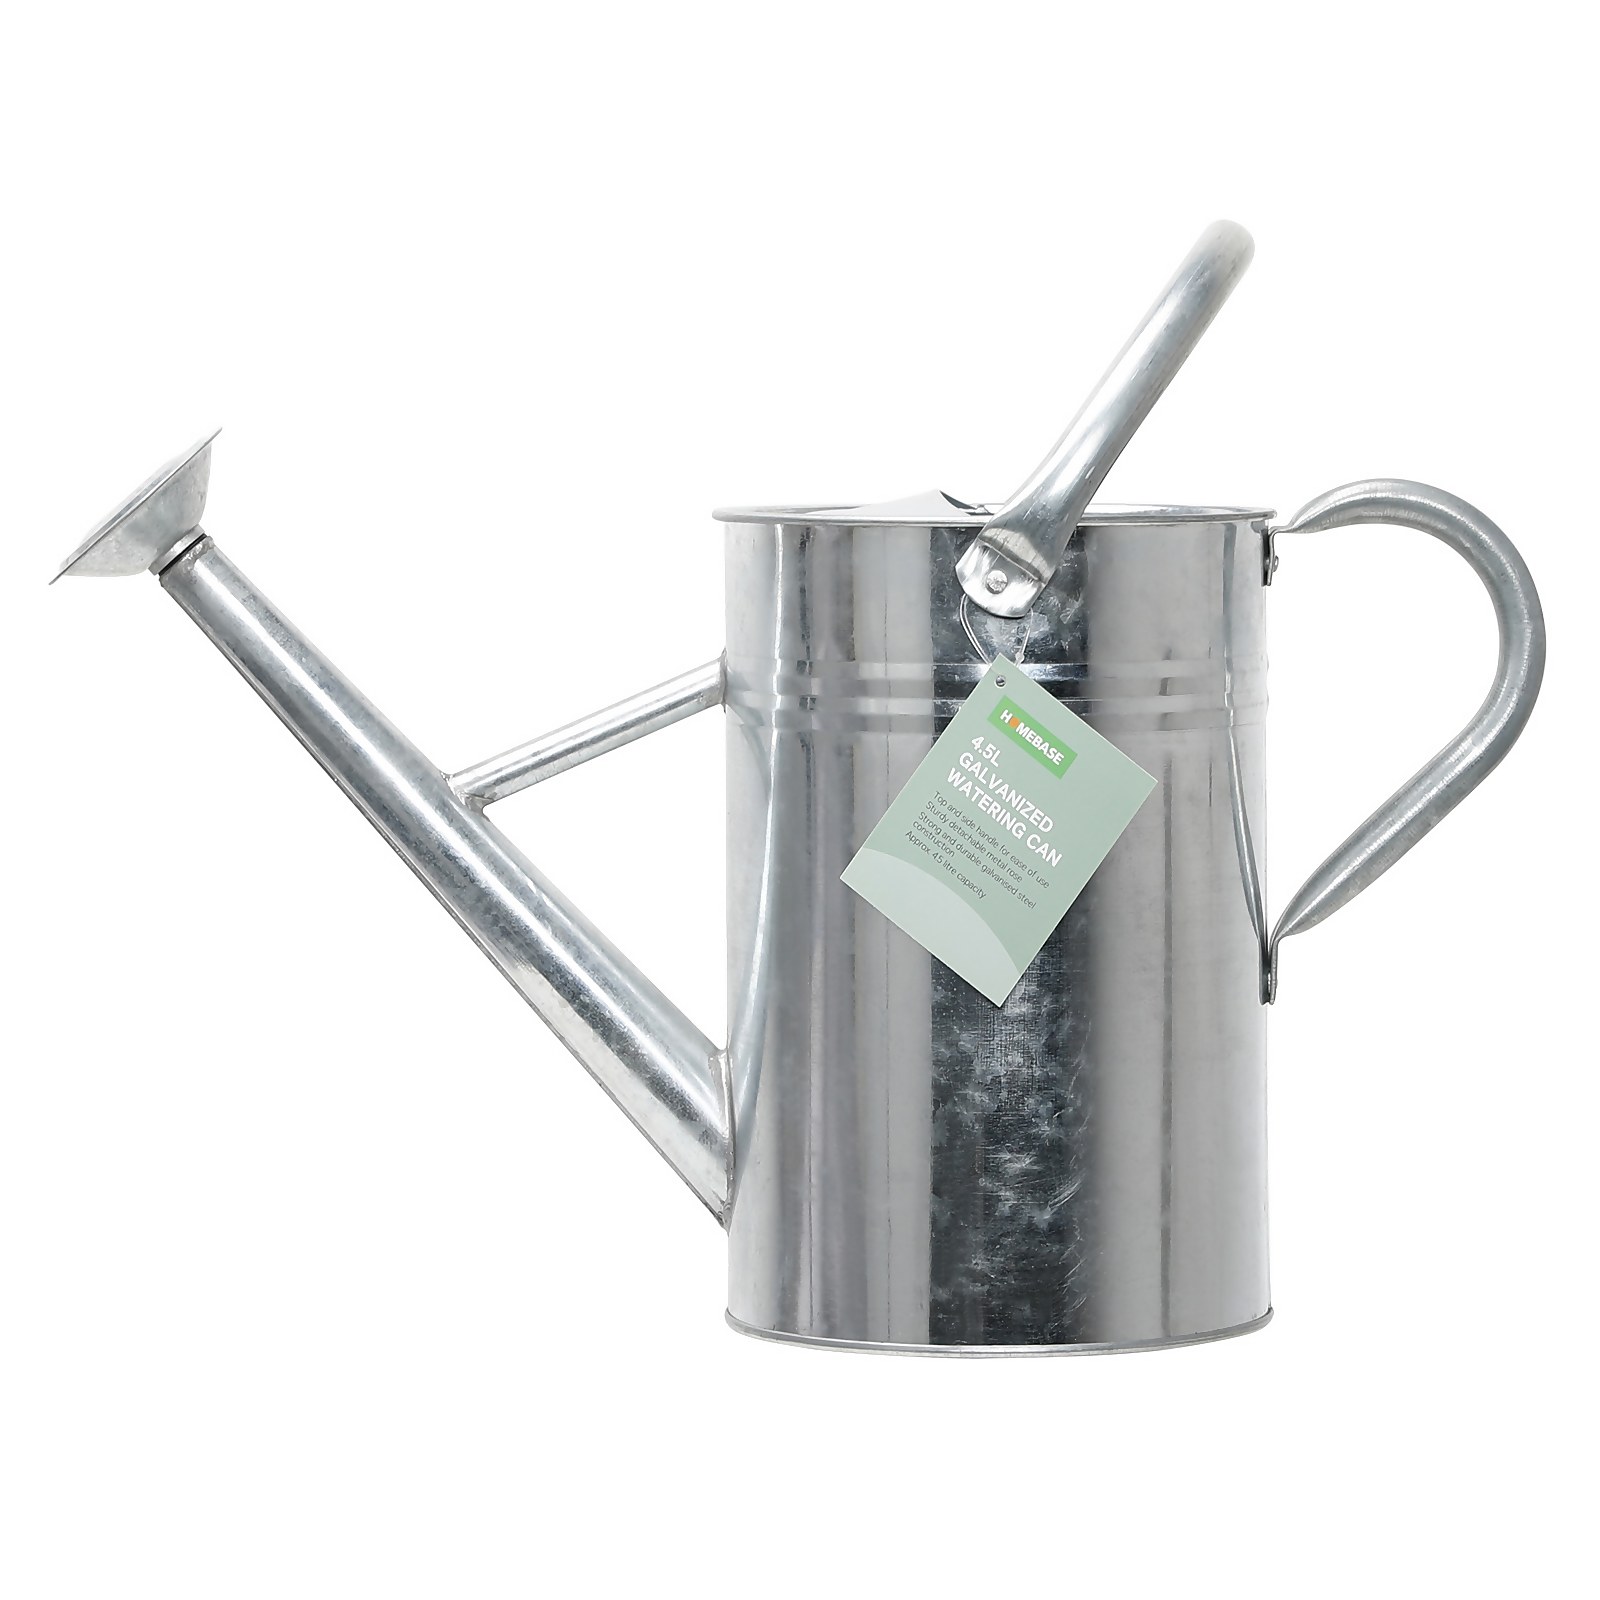 Photo of Homebase Watering Can Galvanized - 4.5l